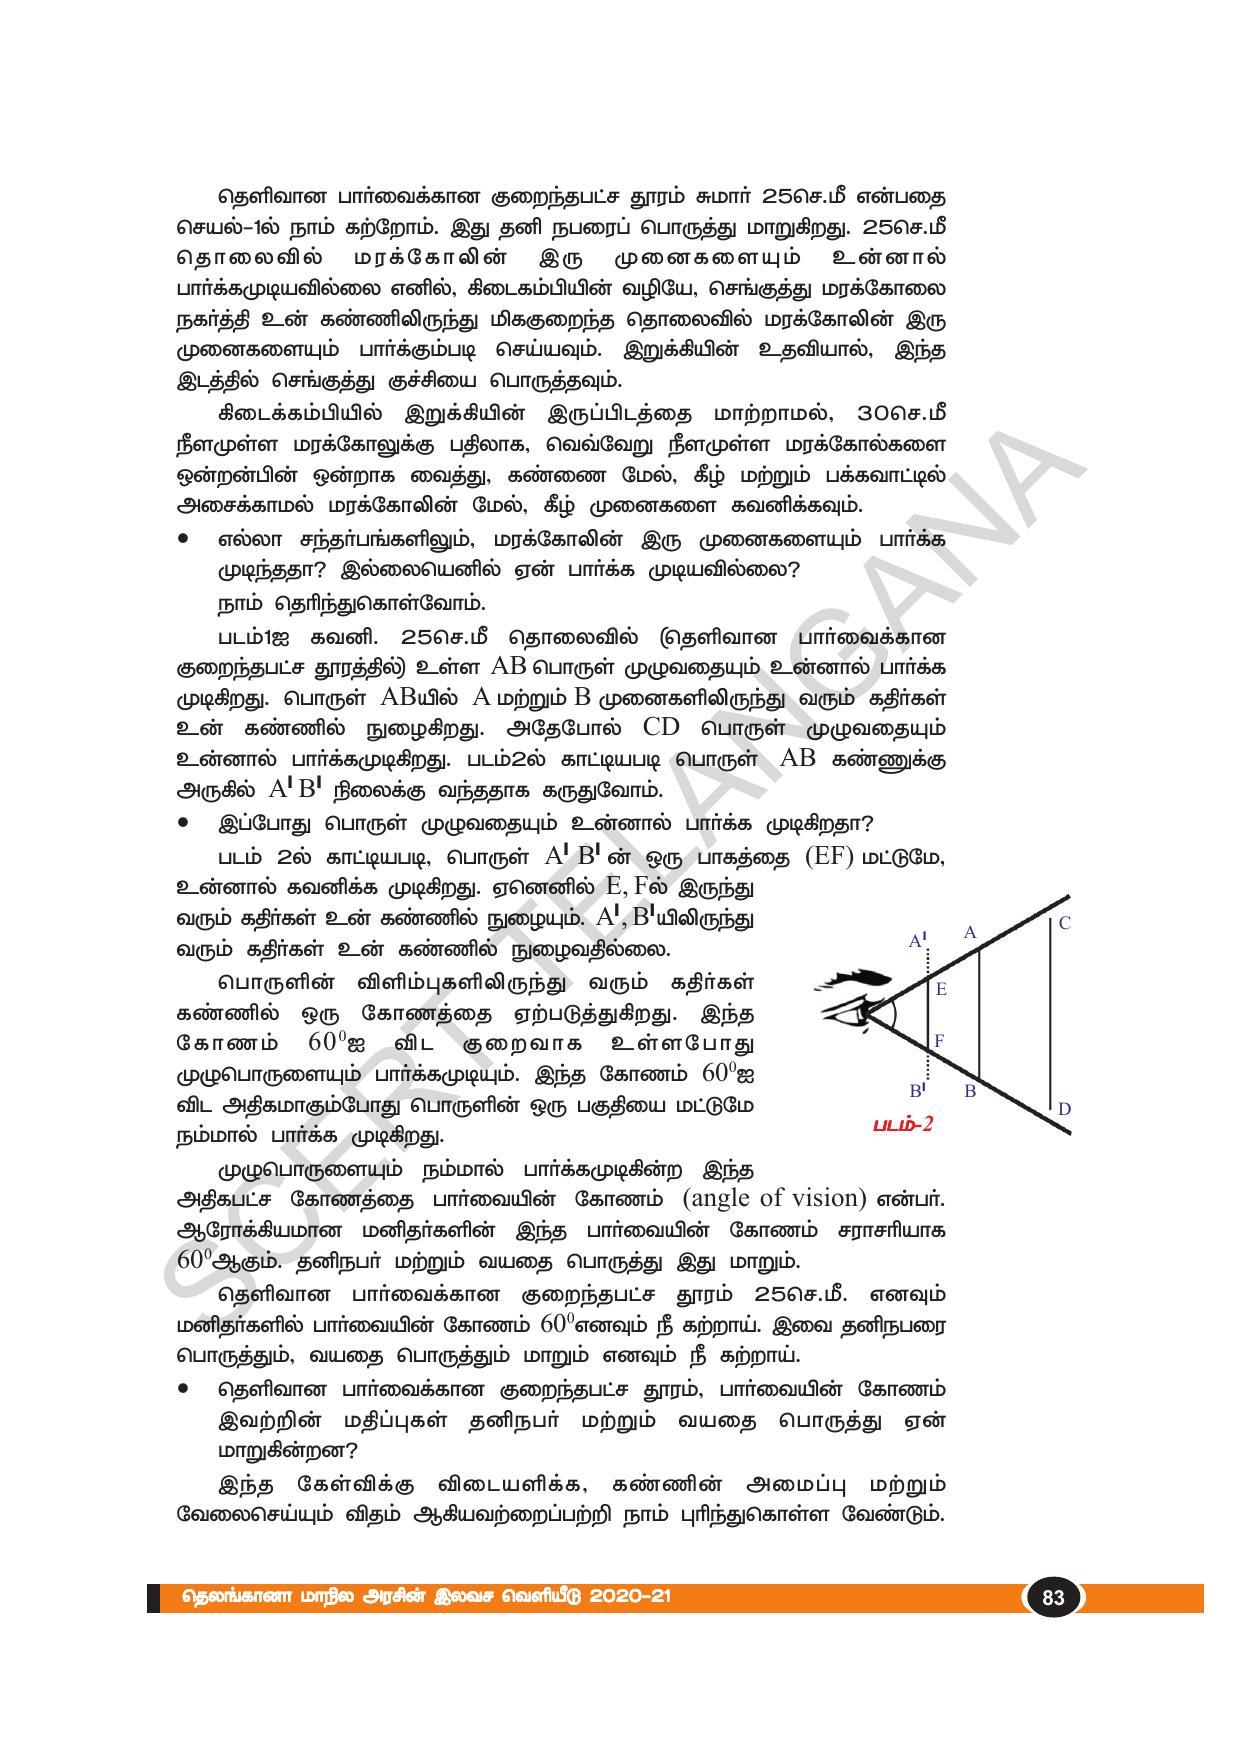 TS SCERT Class 10 Physical Science(Tamil Medium) Text Book - Page 95